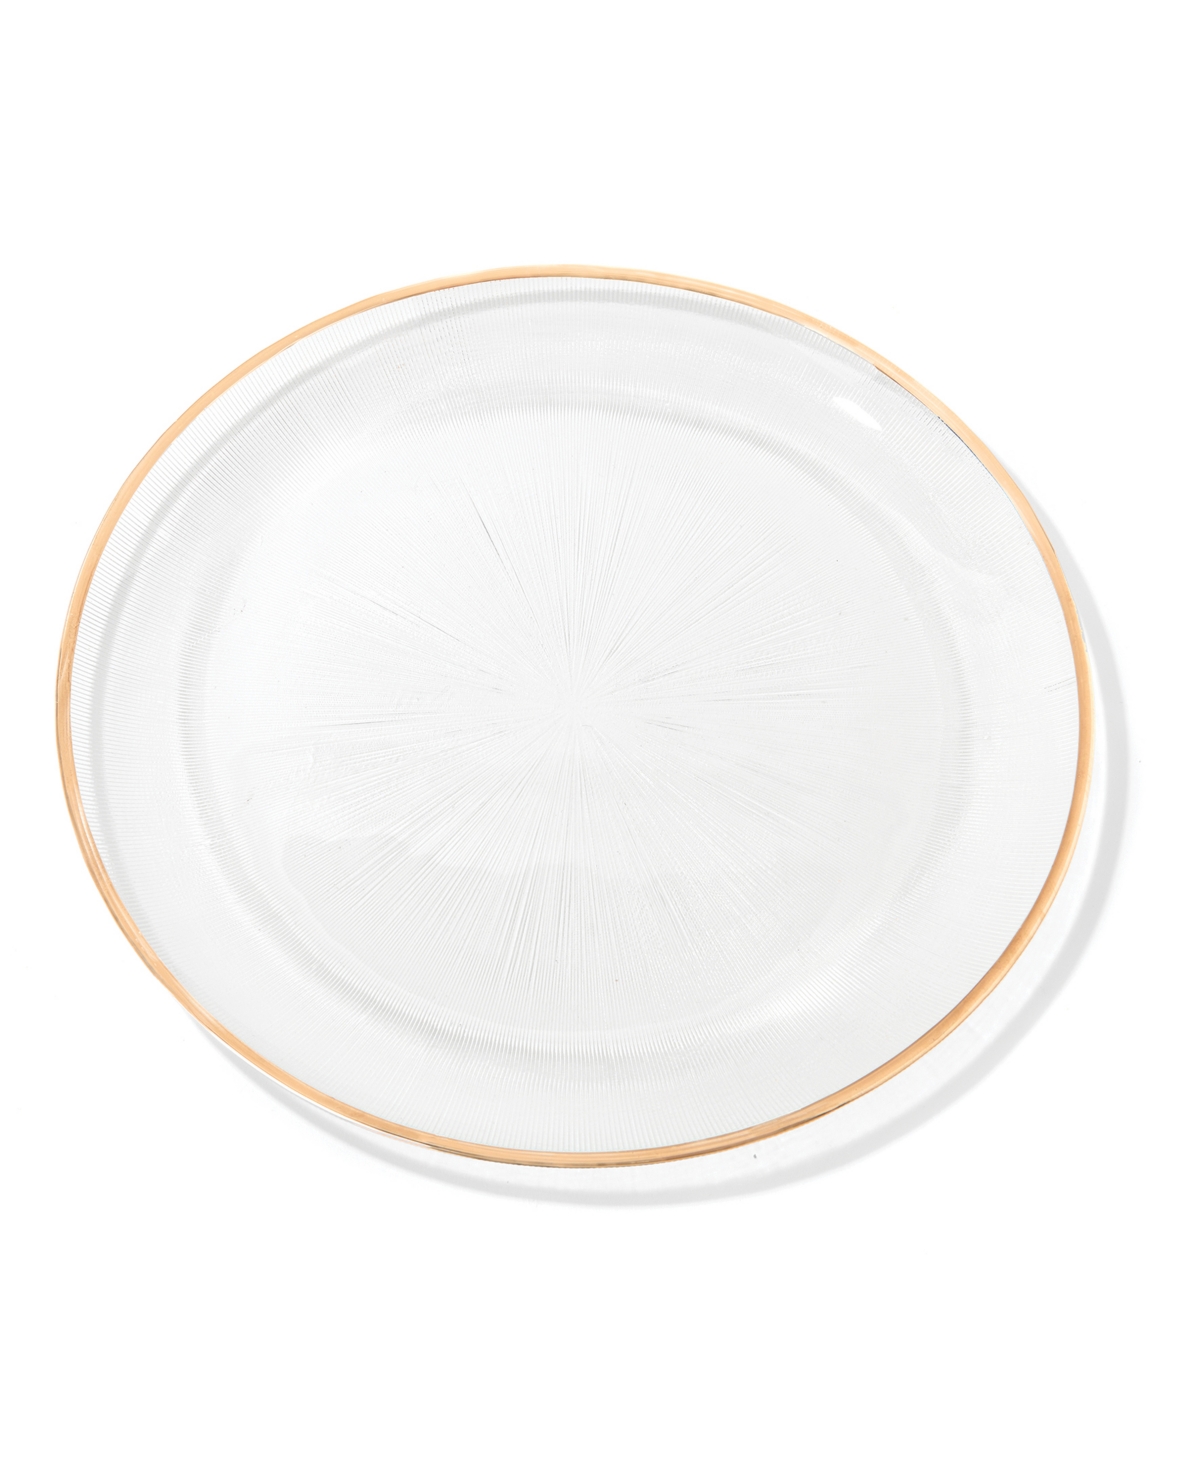 American Atelier Elite Glass Charger Plate With Gold-tone Rim, 13"